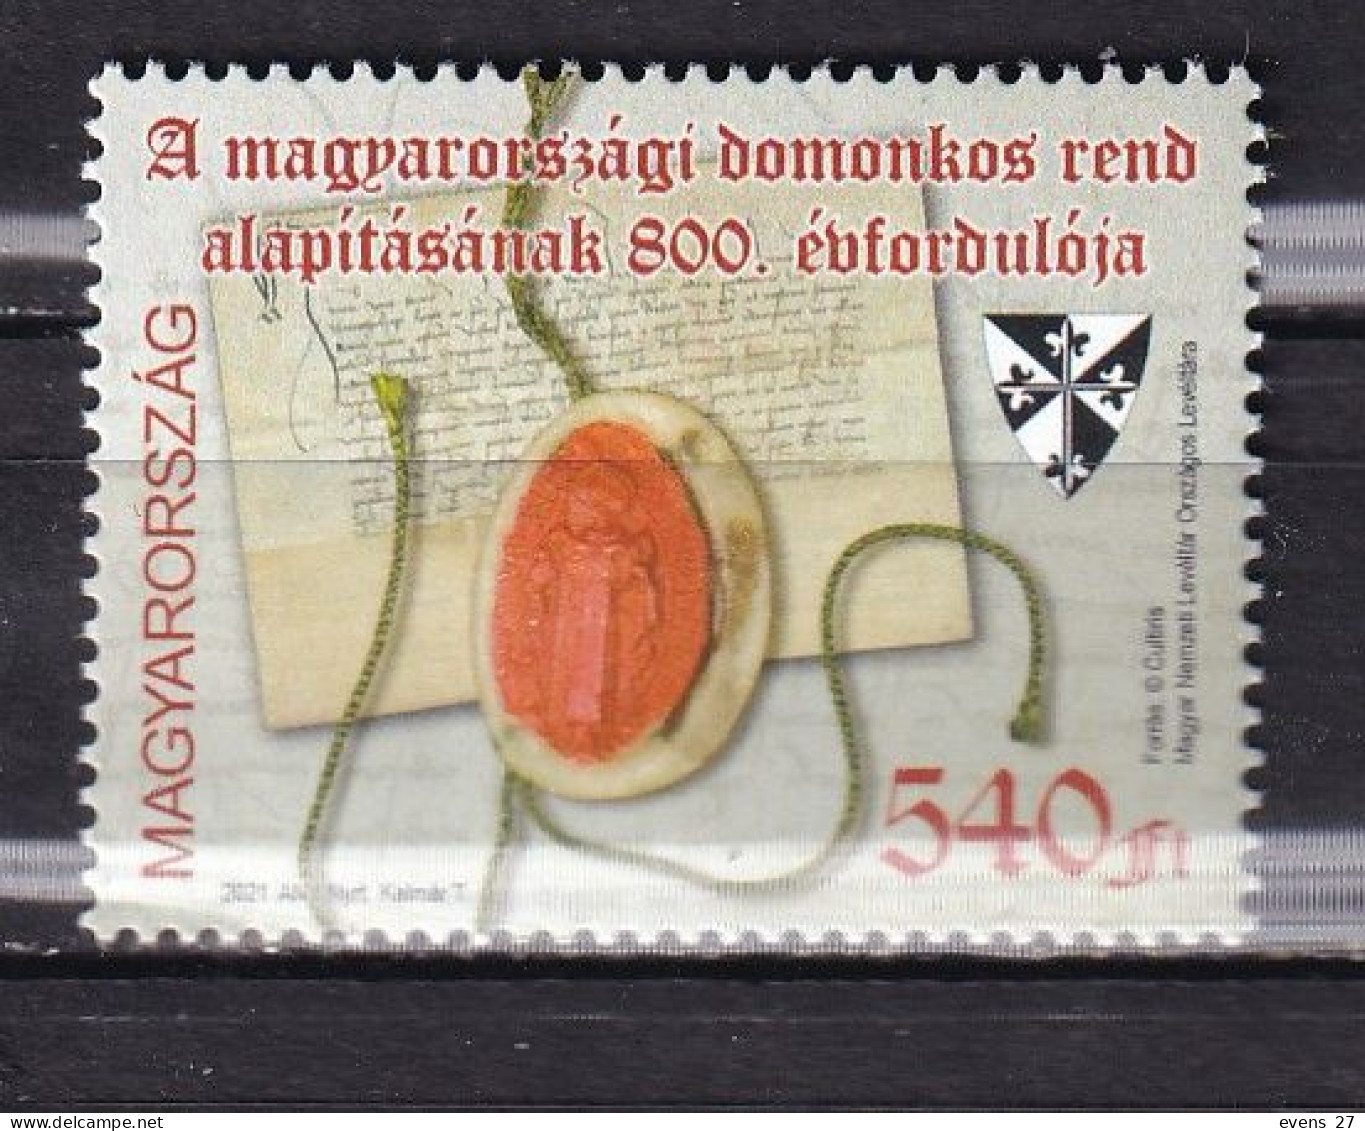 HUNGARY-2021- DOMINICAN ORDER-MNH. - Nuovi